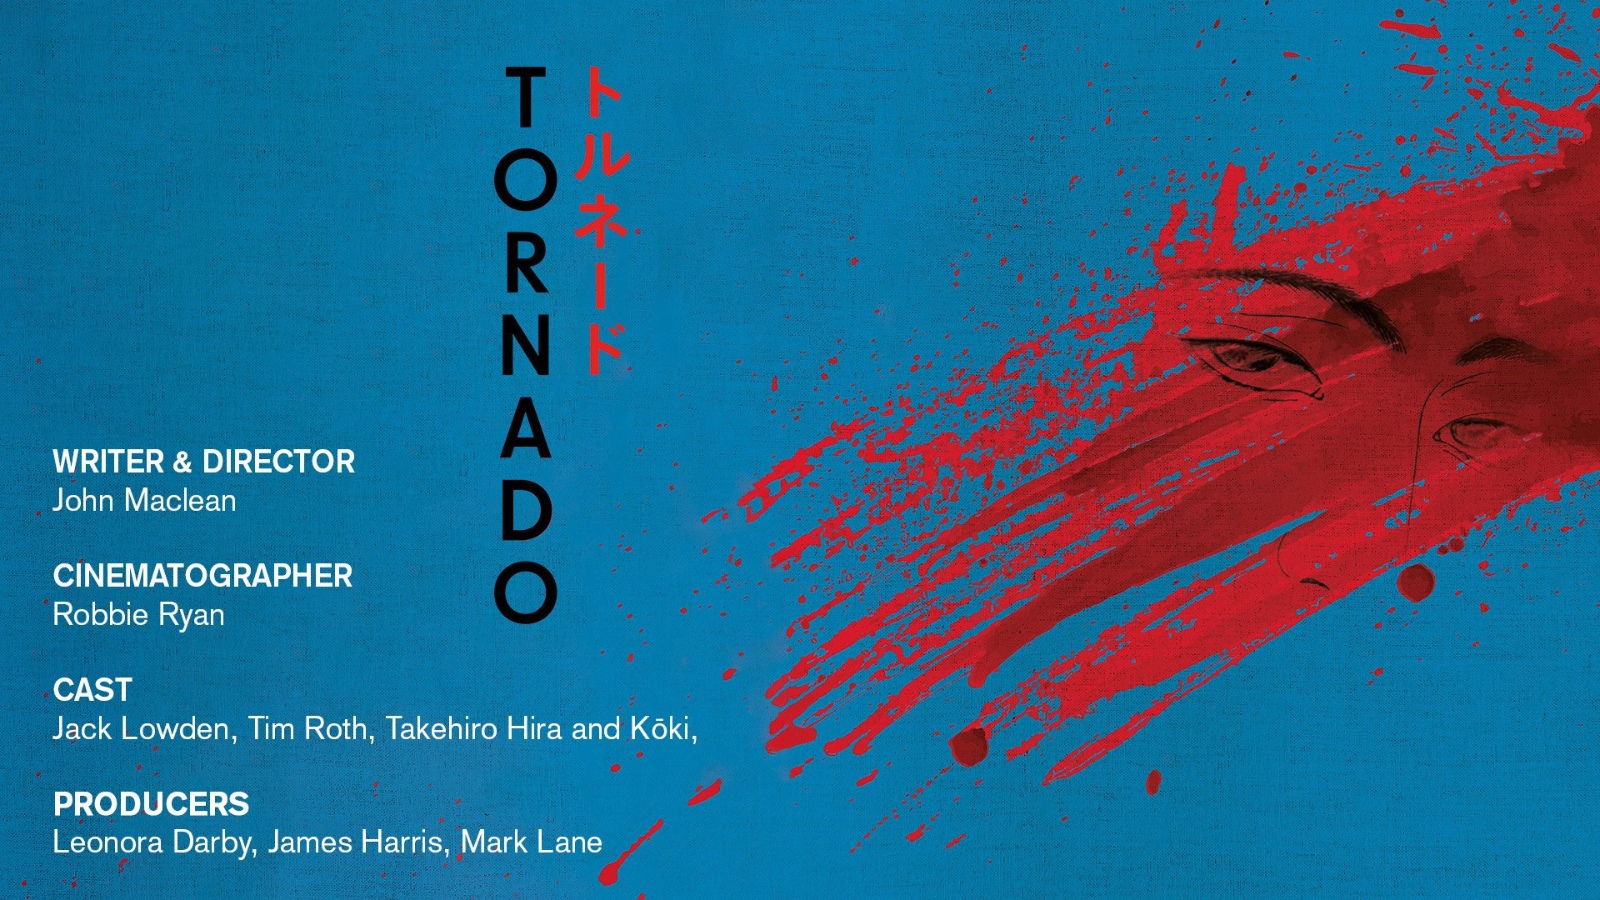 This film poster has a blue background, and the word tornado is written vertically down the left side in English and Japanese. The cast is listed in white text in the far left hand of the image at the bottom and on the right of the image is a splash of red with the eyes and nose of a women drawn in black ink